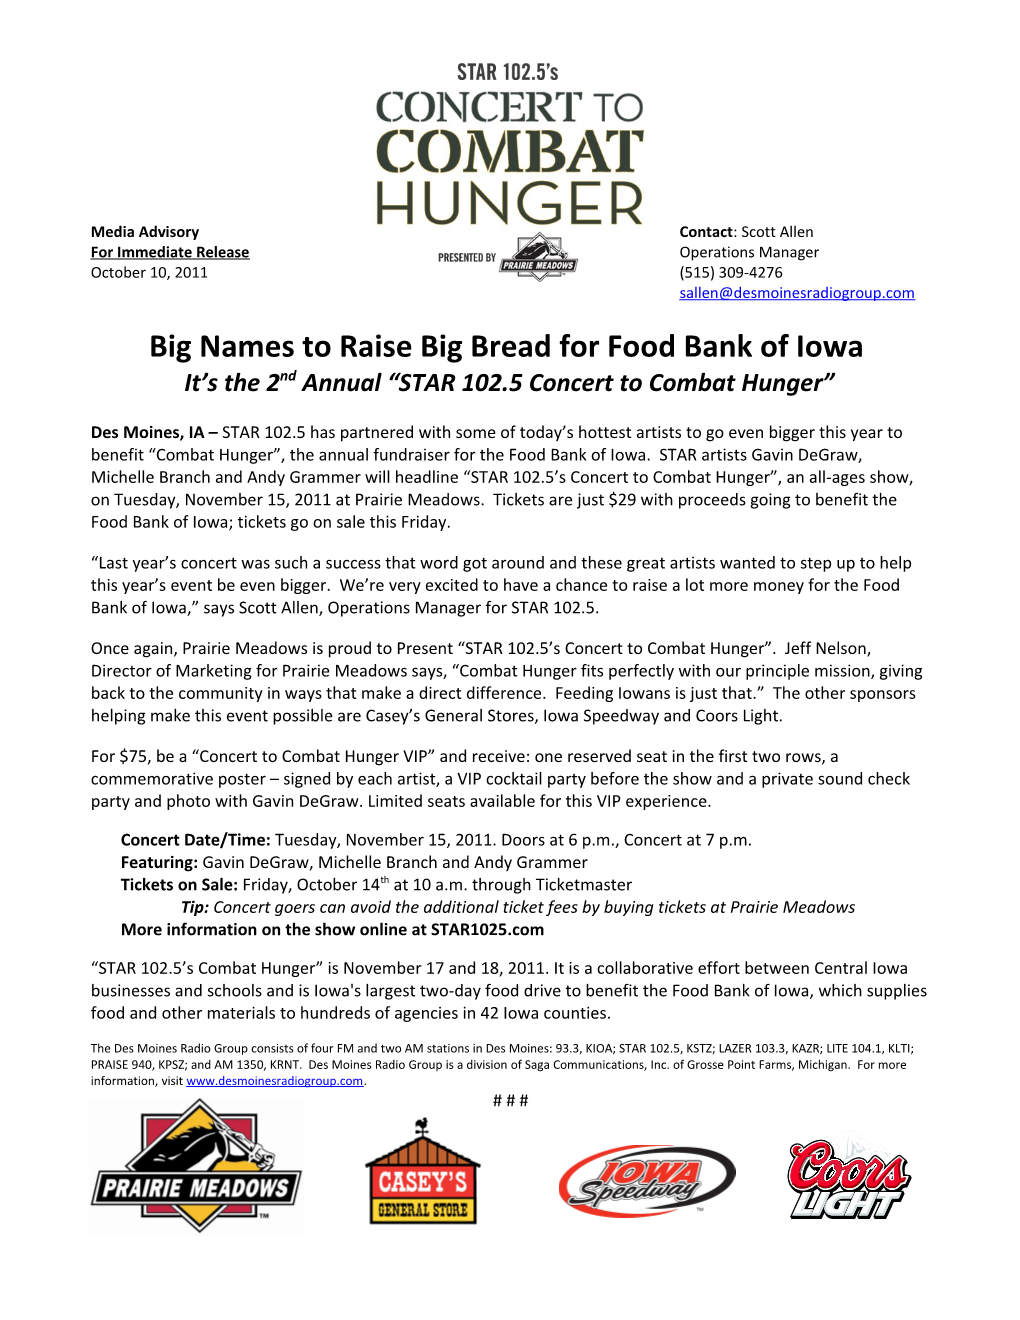 Big Names to Raise Big Bread for Food Bank of Iowa